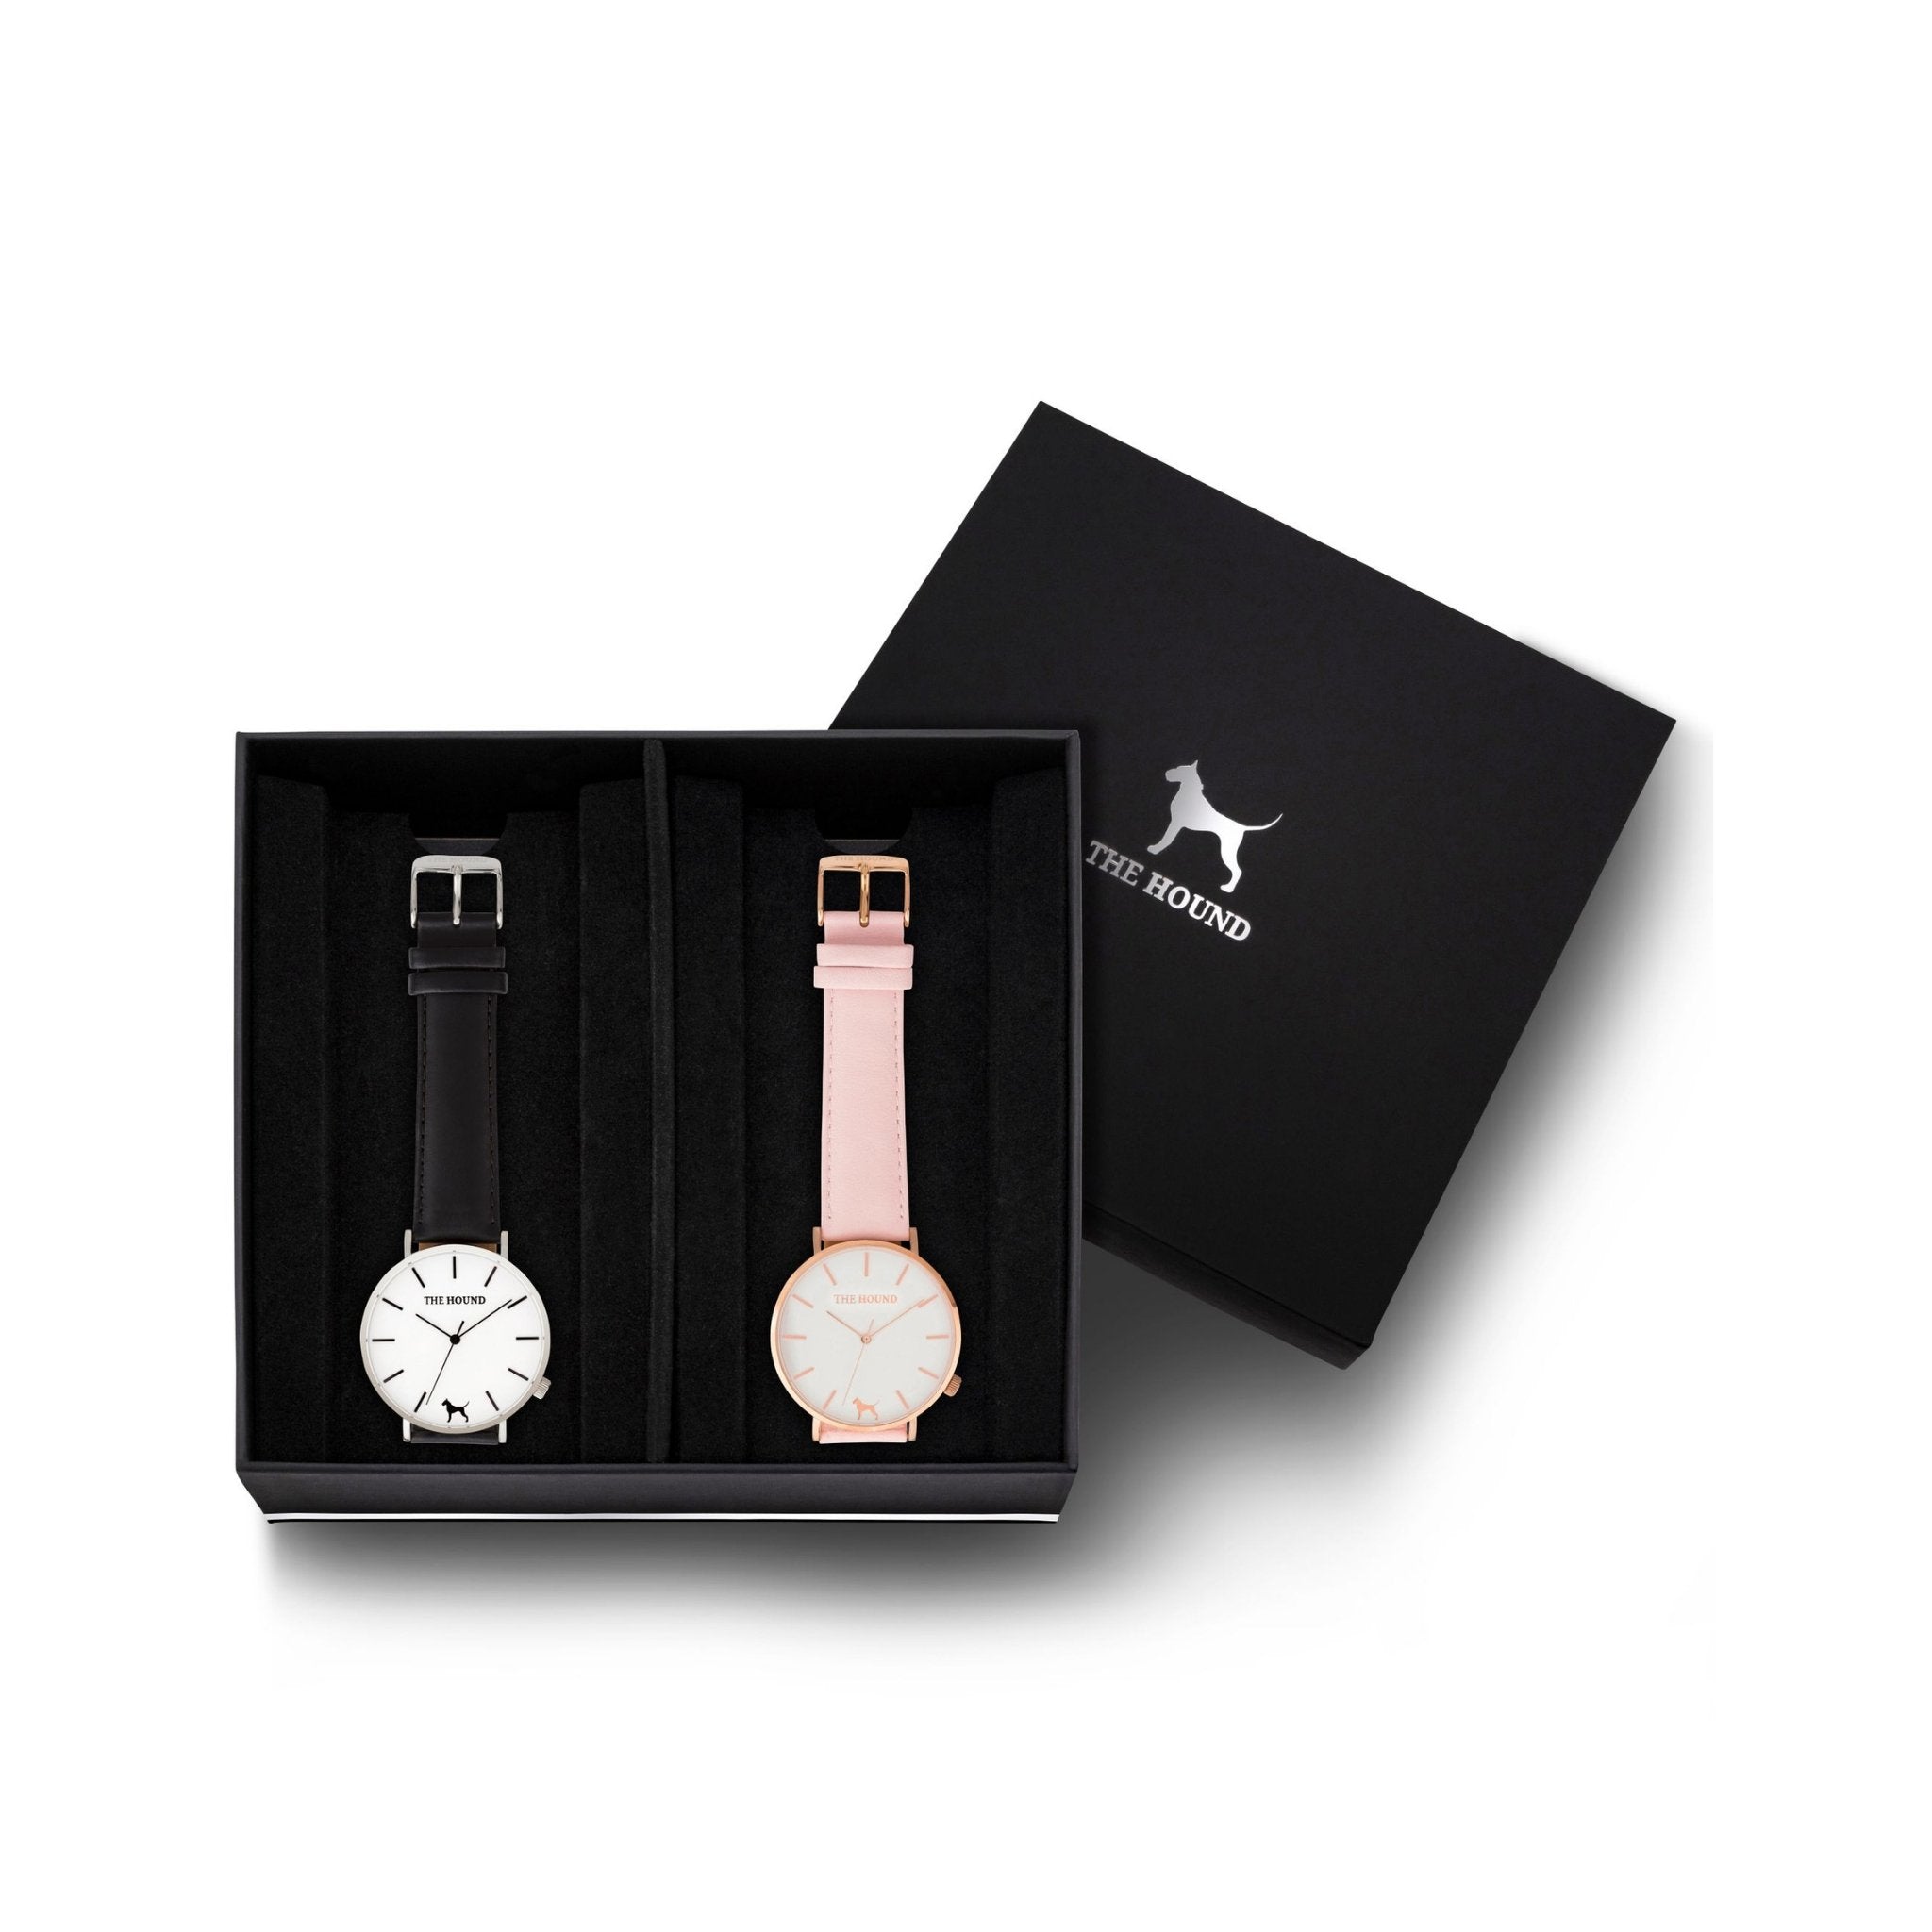 Custom gift set - Silver and white watch with stitched black genuine leather band and a rose gold and white watch with stitched blush pink genuine leather band